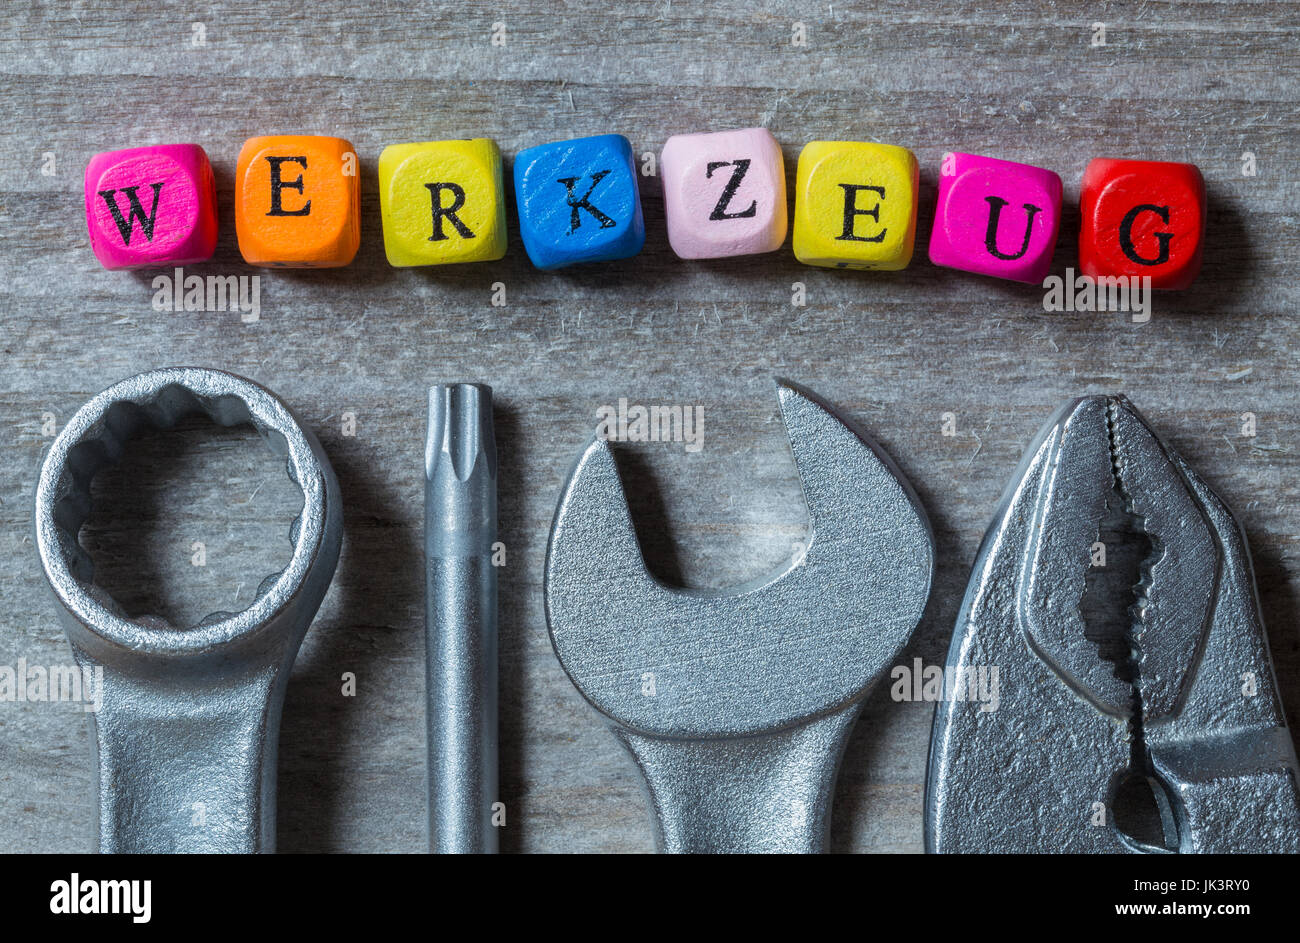 Werkzeug (in german Tool) letter cube and tool on gray wood visualization. Stock Photo